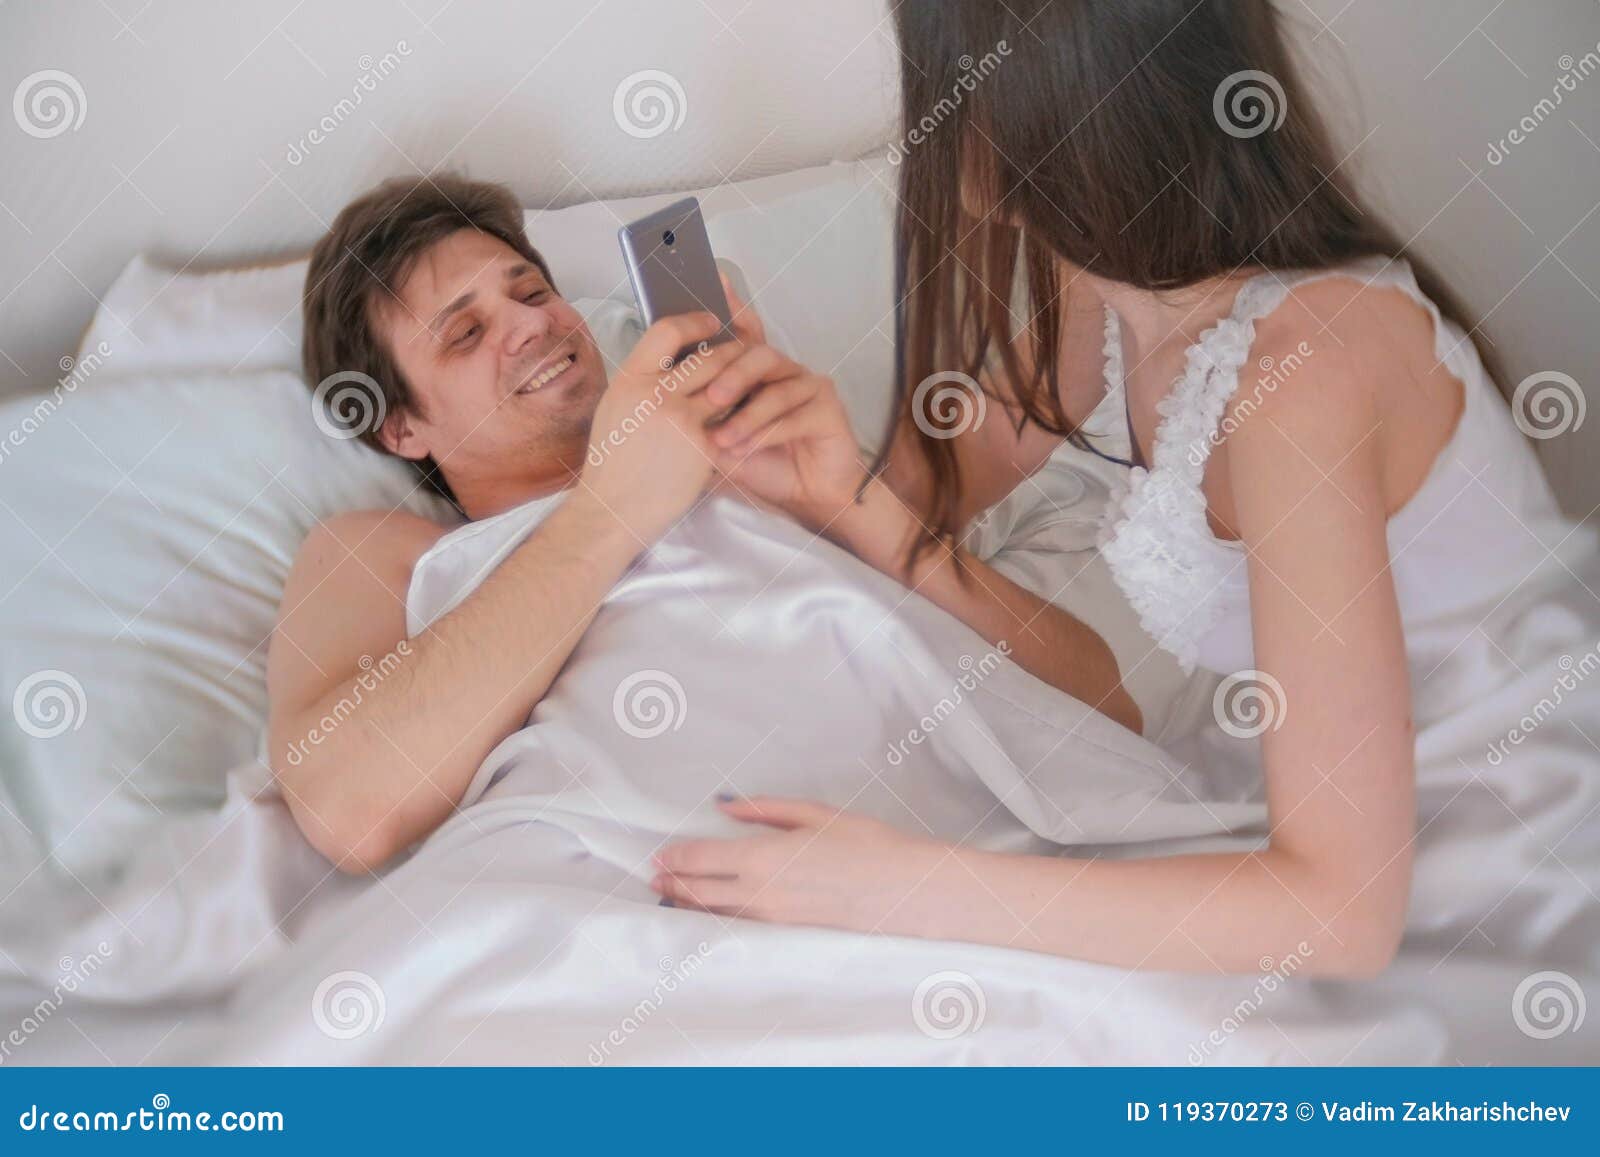 Man Photographs a Woman on Mobile Phone. Couple Man and Woman Lying in